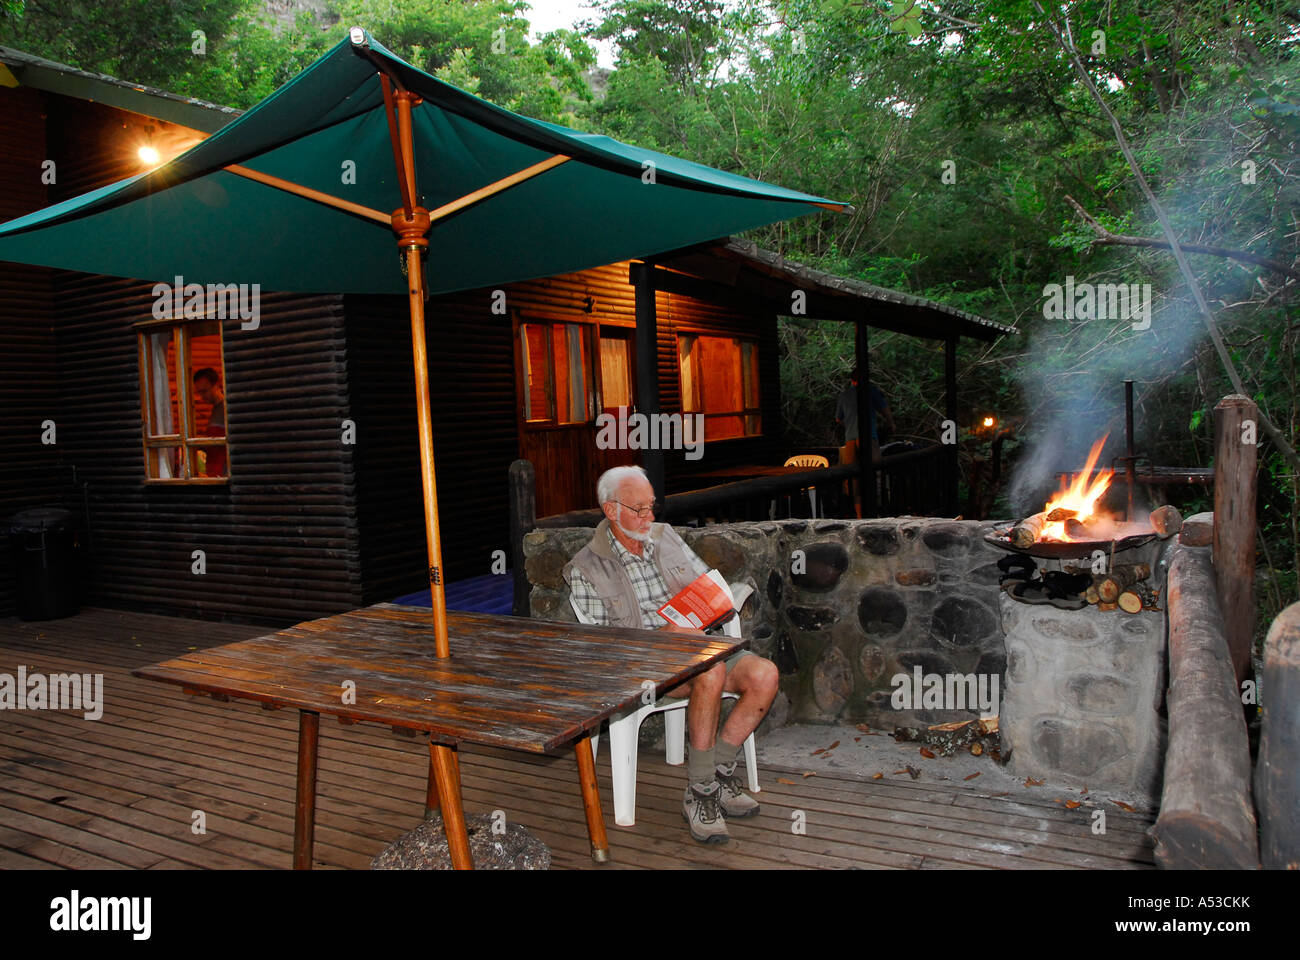 Grandpa reading a book next to the fire, Lekgalameetse Nature Reserve, Limpopo Province, South Africa Stock Photo